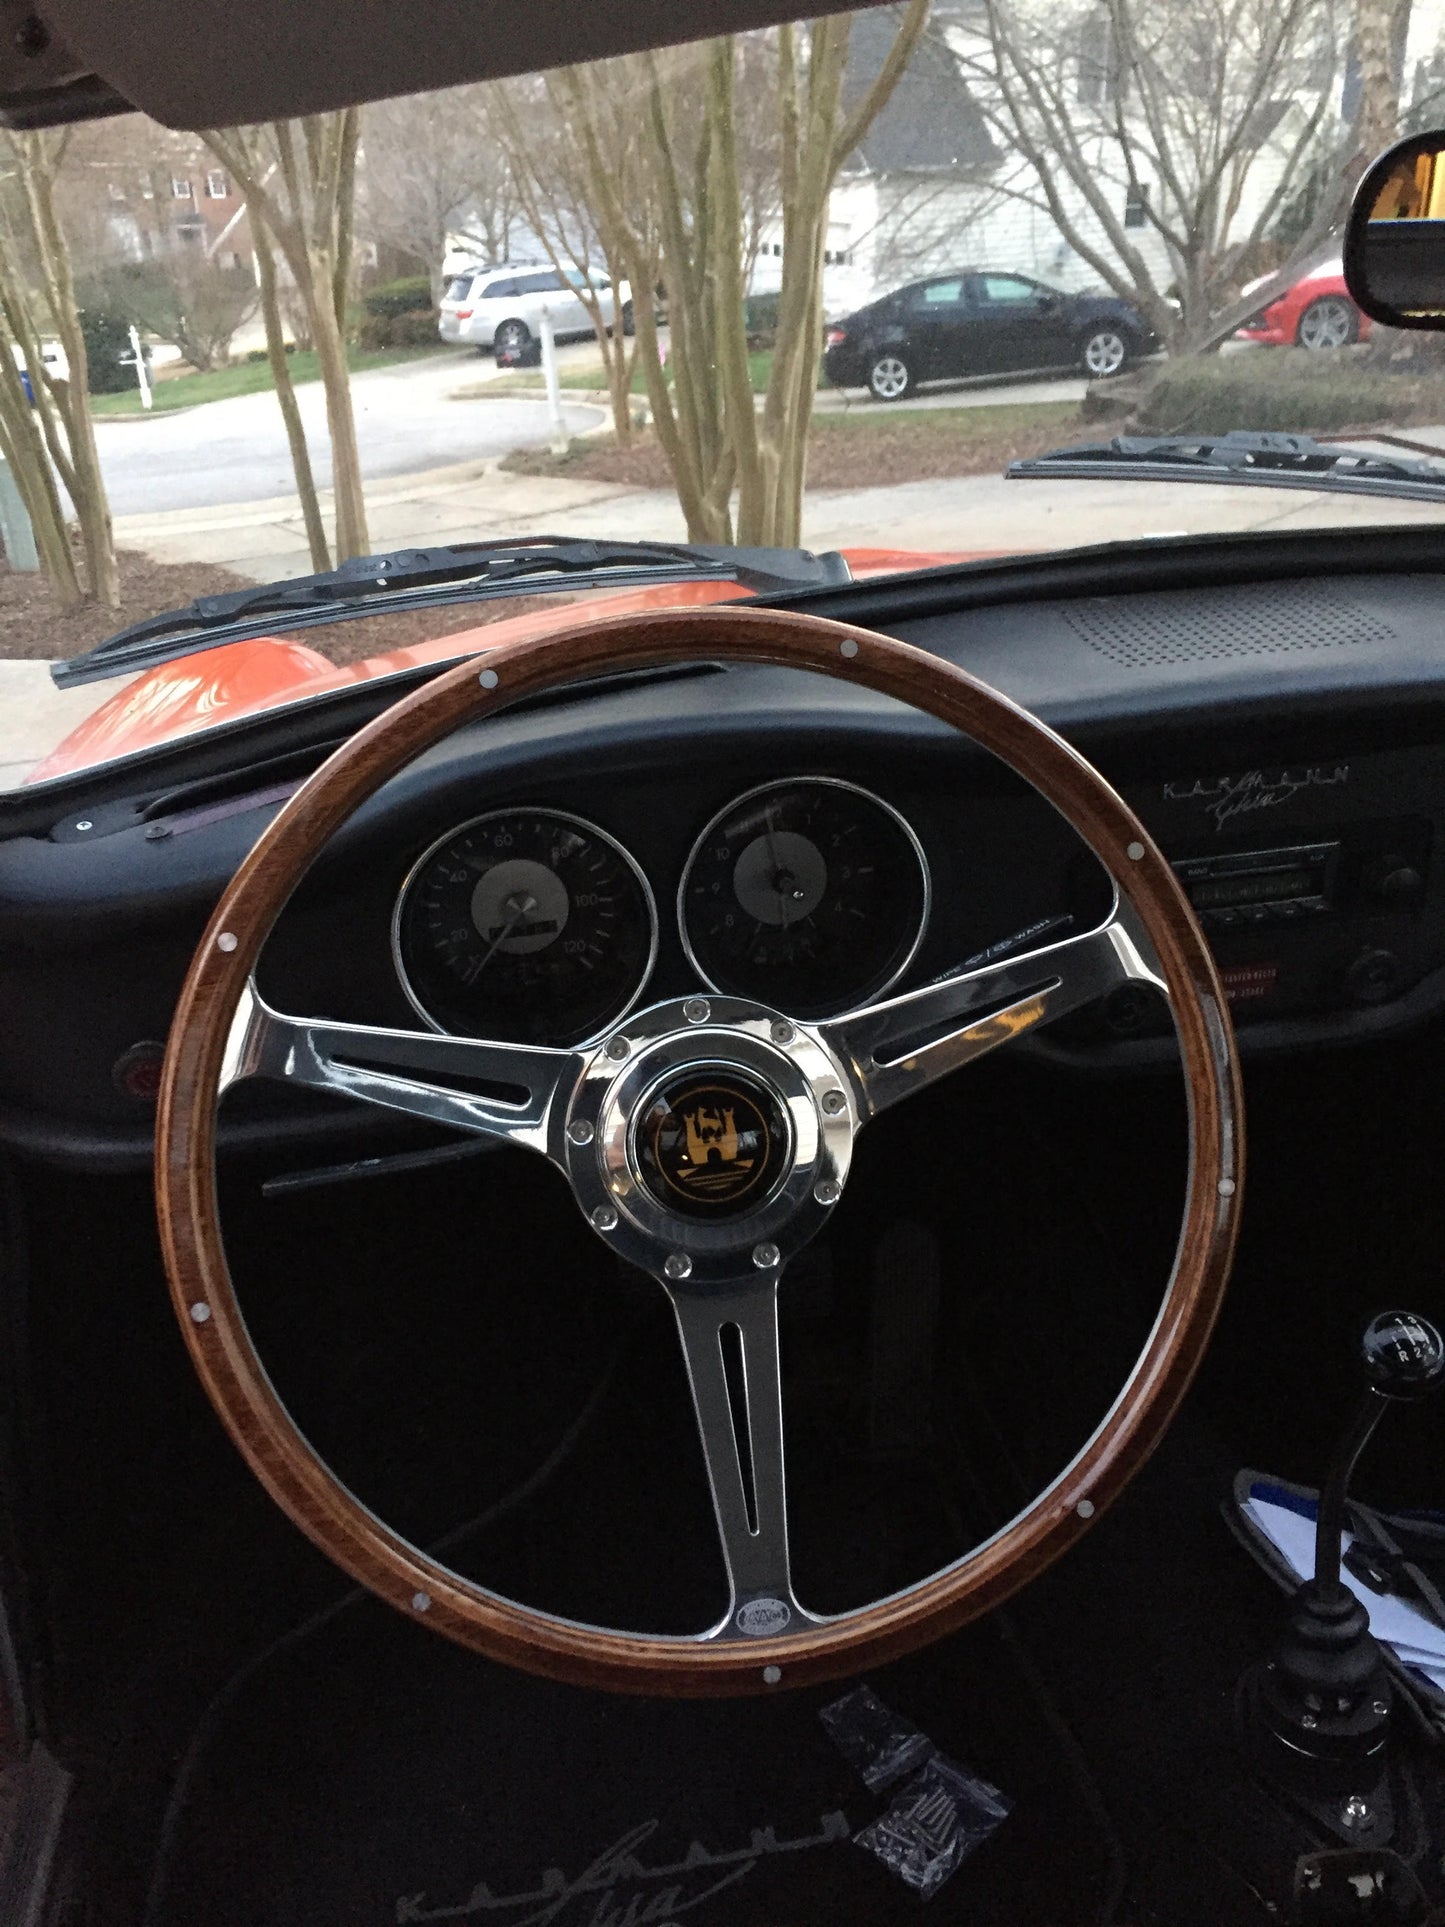 Steering wheel by Aircooled Accessories for Beetle/Ghia/Type3 - Slotted.